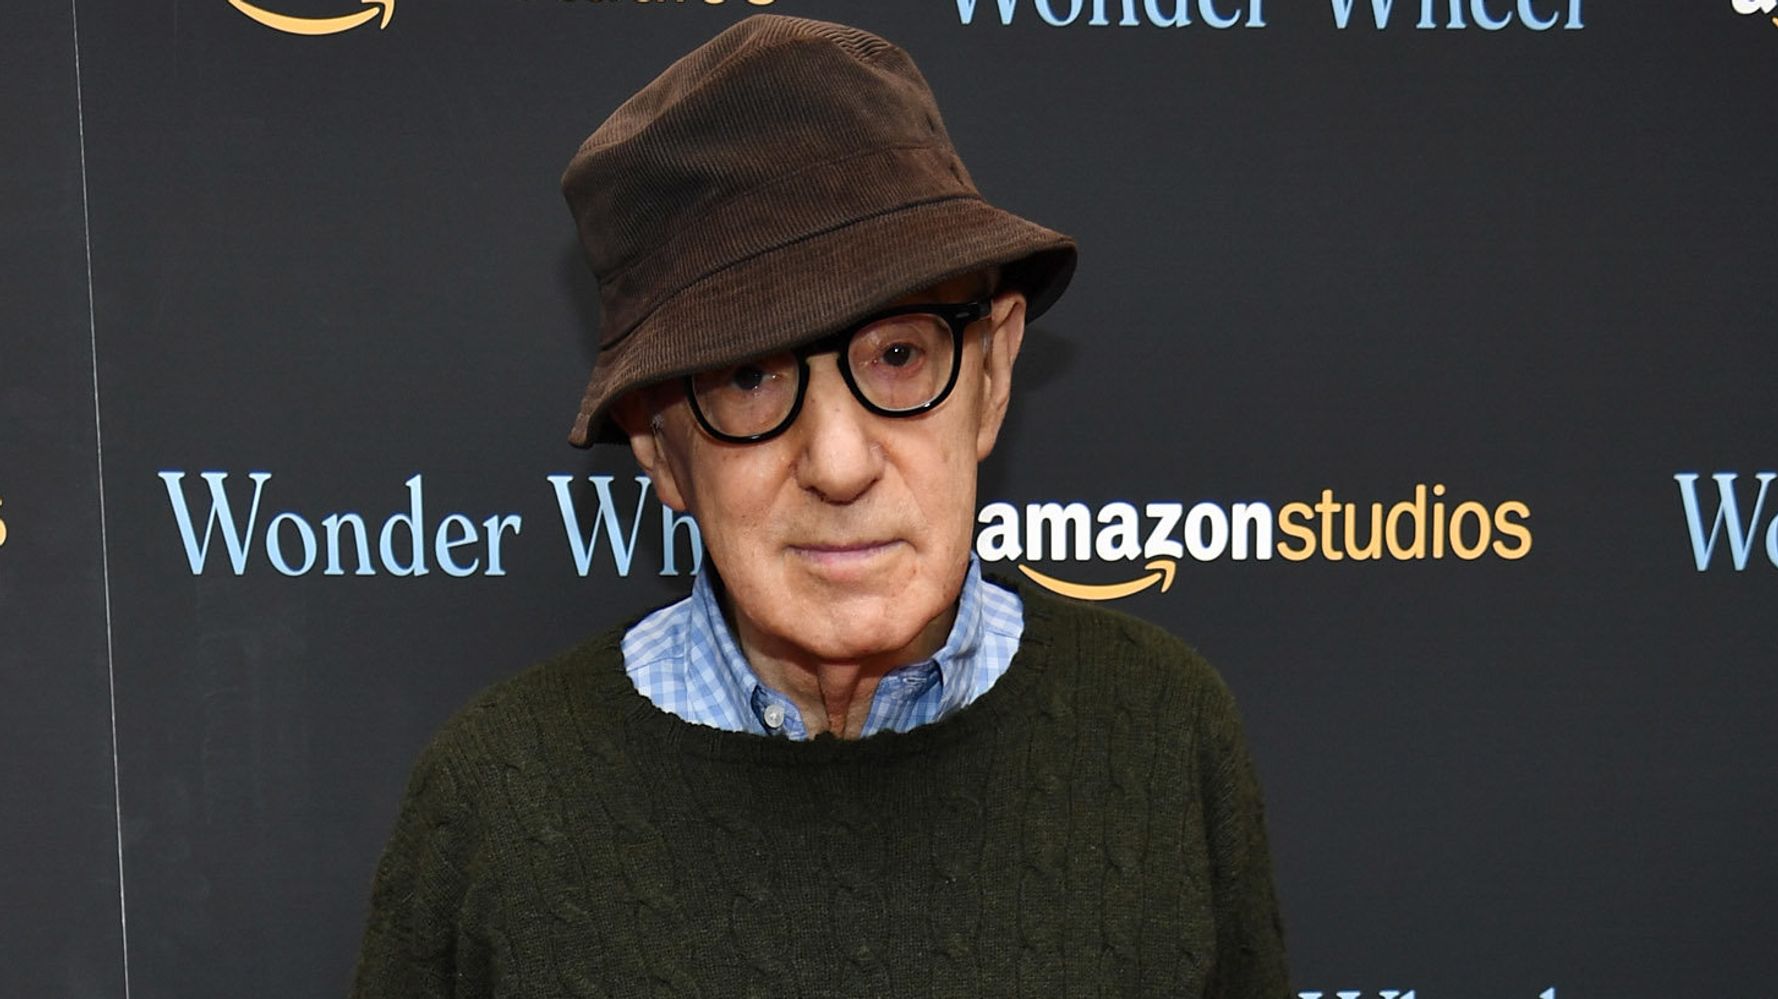 verwerken hoogte Succes Amazon Defends Cutting Ties With Woody Allen, Citing His Dismissive Me Too  Comments | HuffPost Entertainment